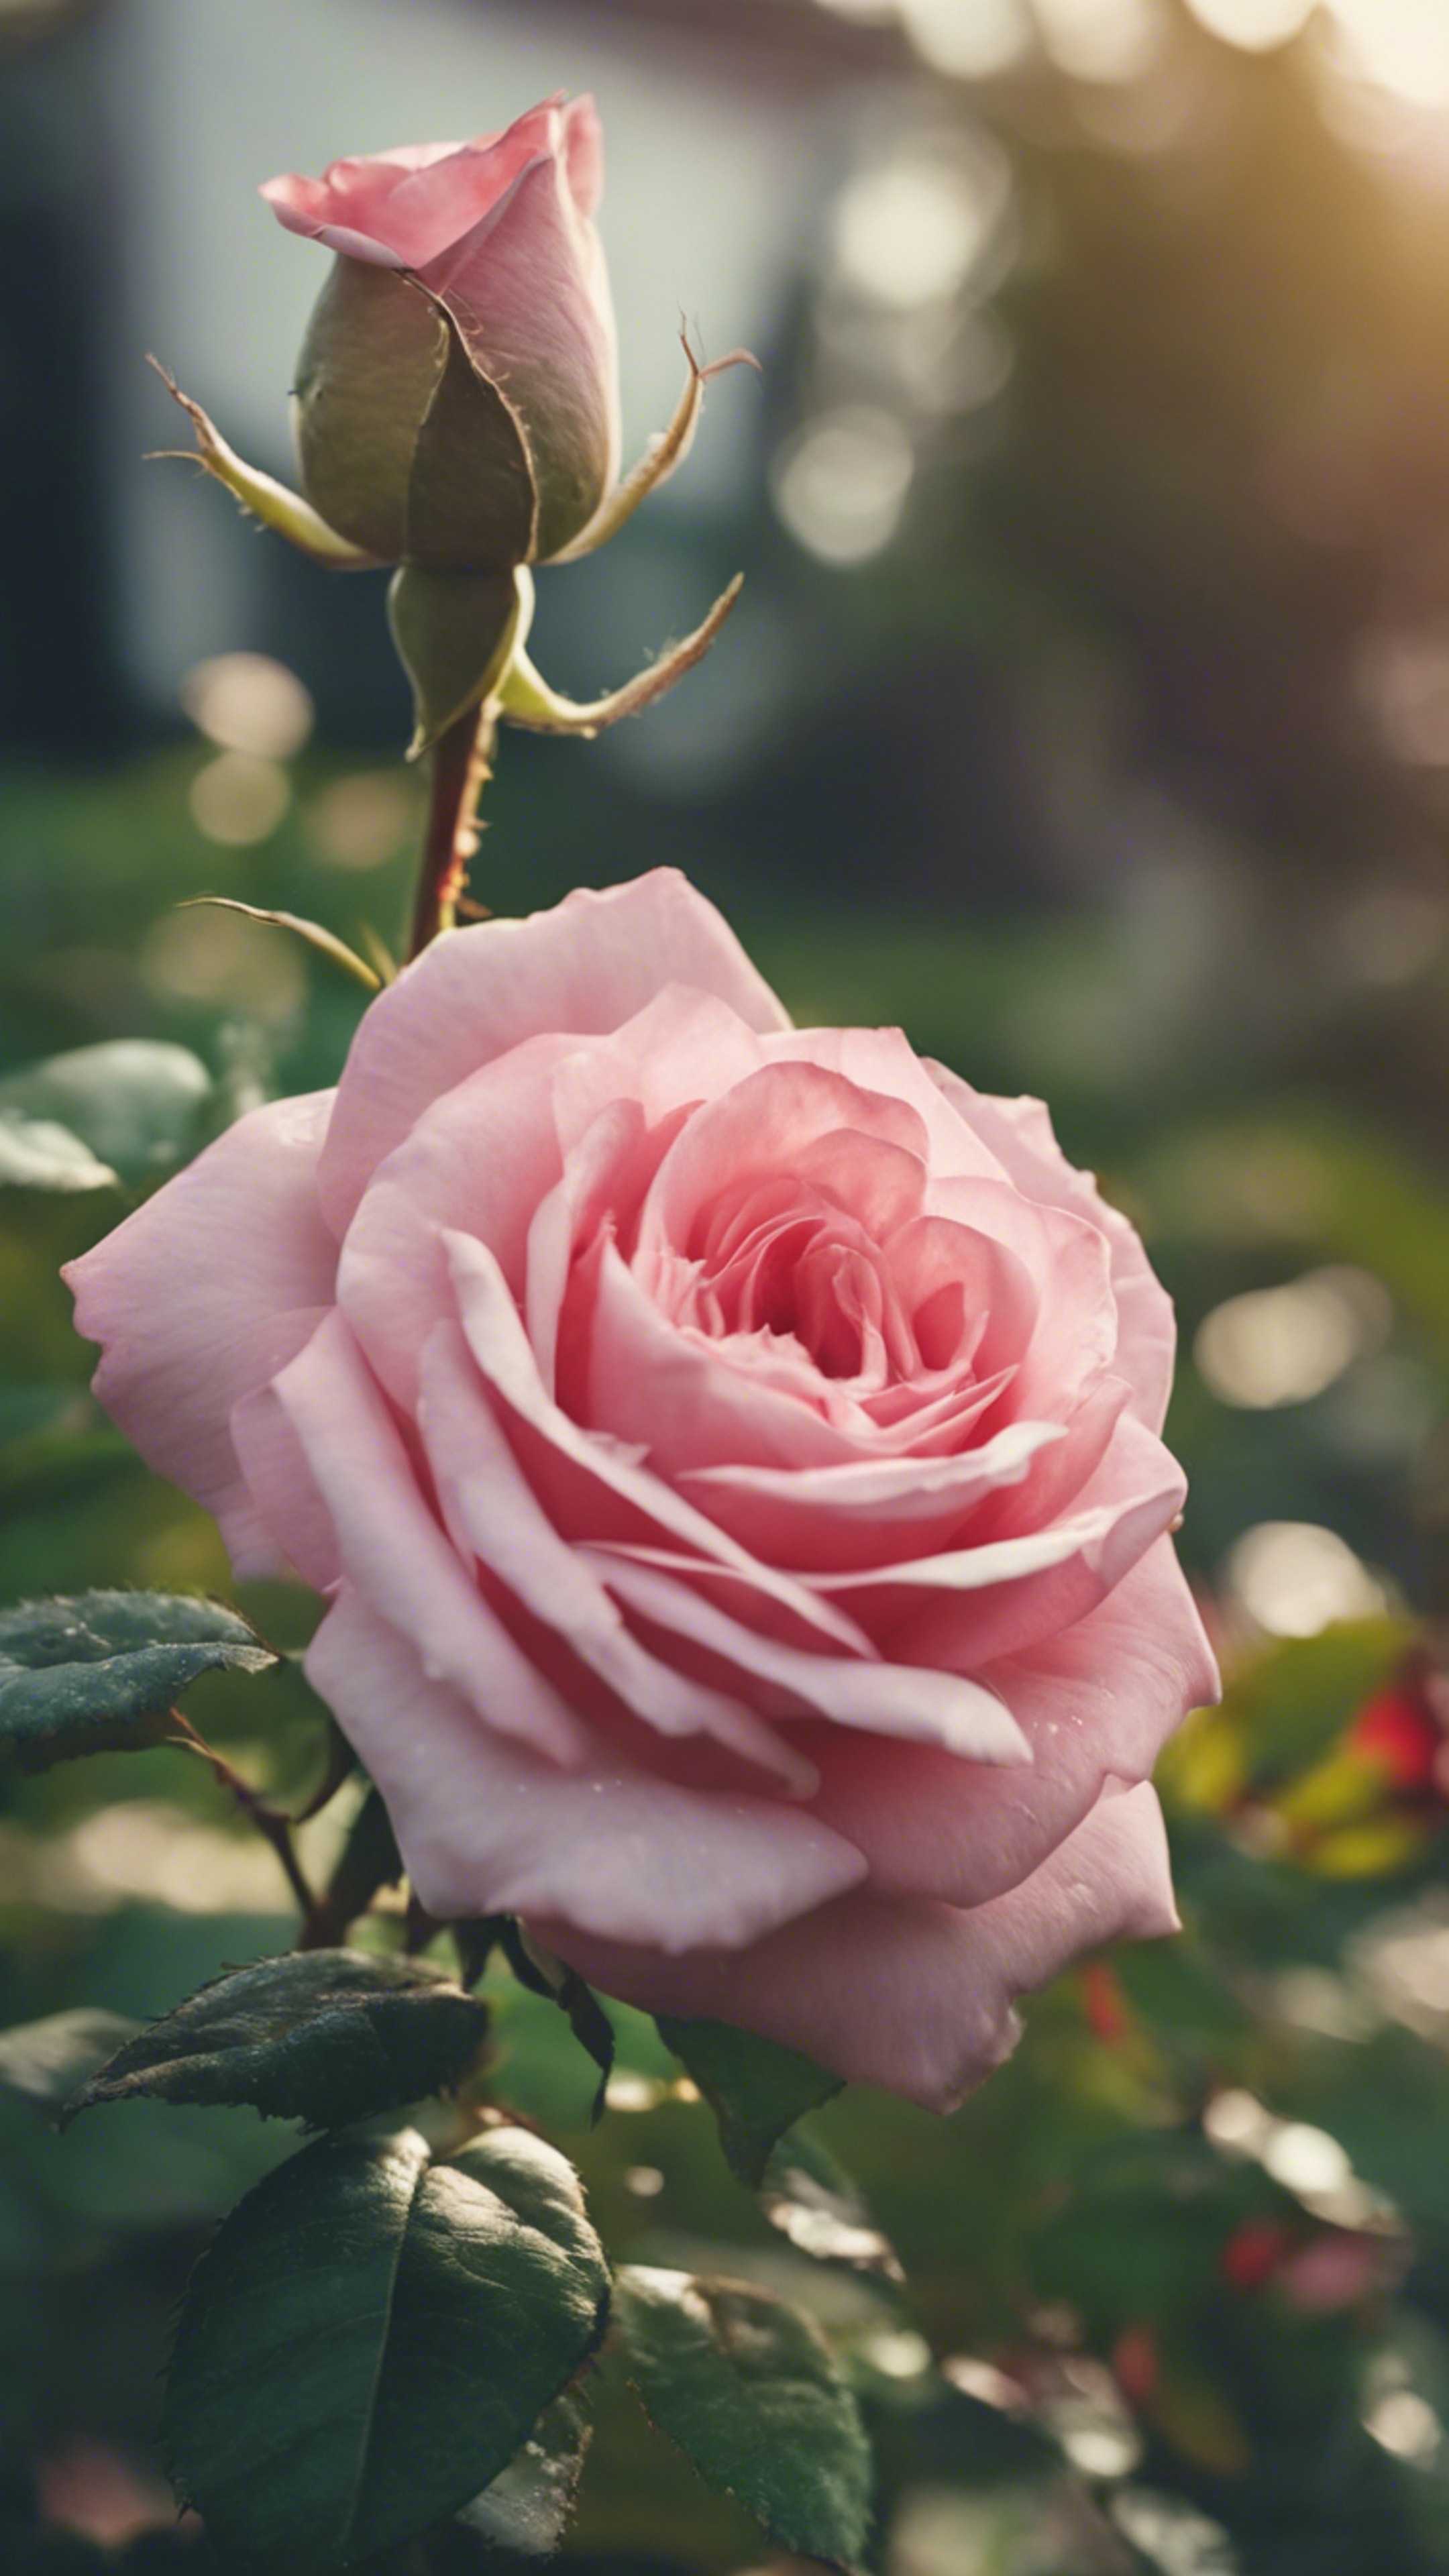 A beautiful pink heart-shaped rose blooming in a lush green garden. Hình nền[602cae484ee541a8ab0b]